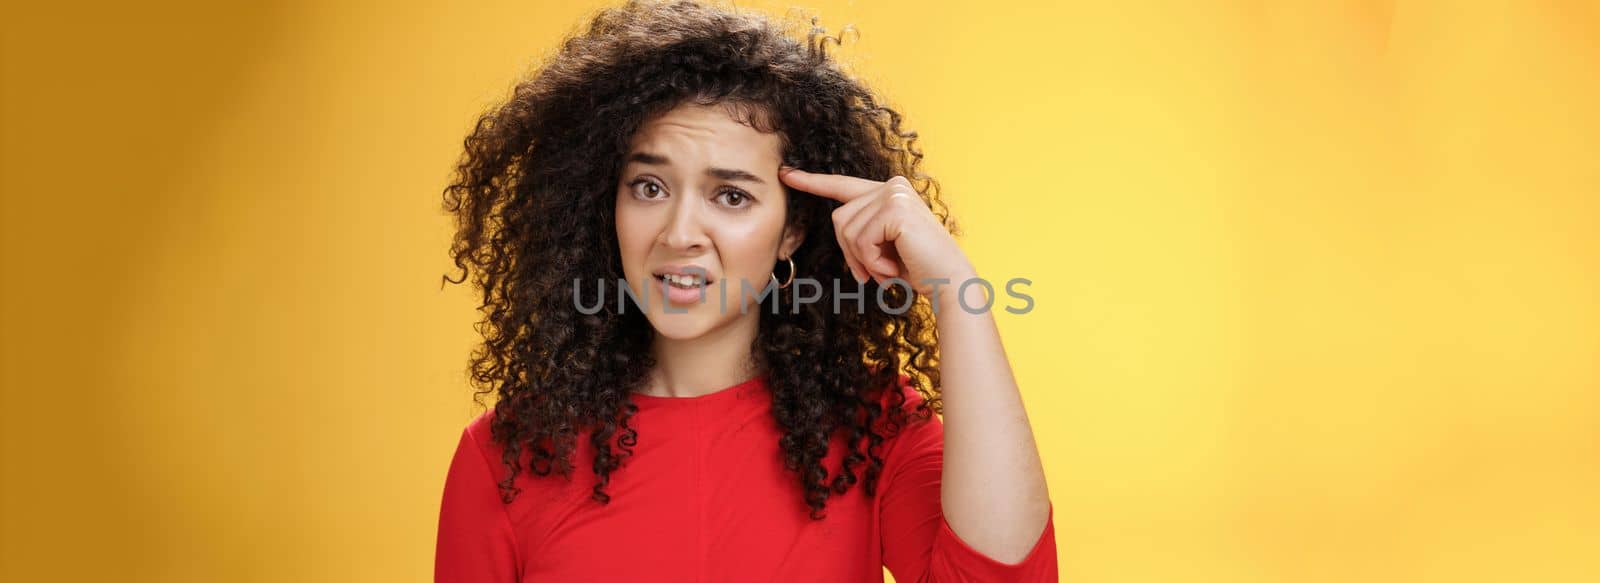 Are you crazy. Portrait of frustrated and confused woman with curly hair holding index finger near temple and raising eyebrows shocked being annoyed with stupid actions of weirdo over yellow wall.